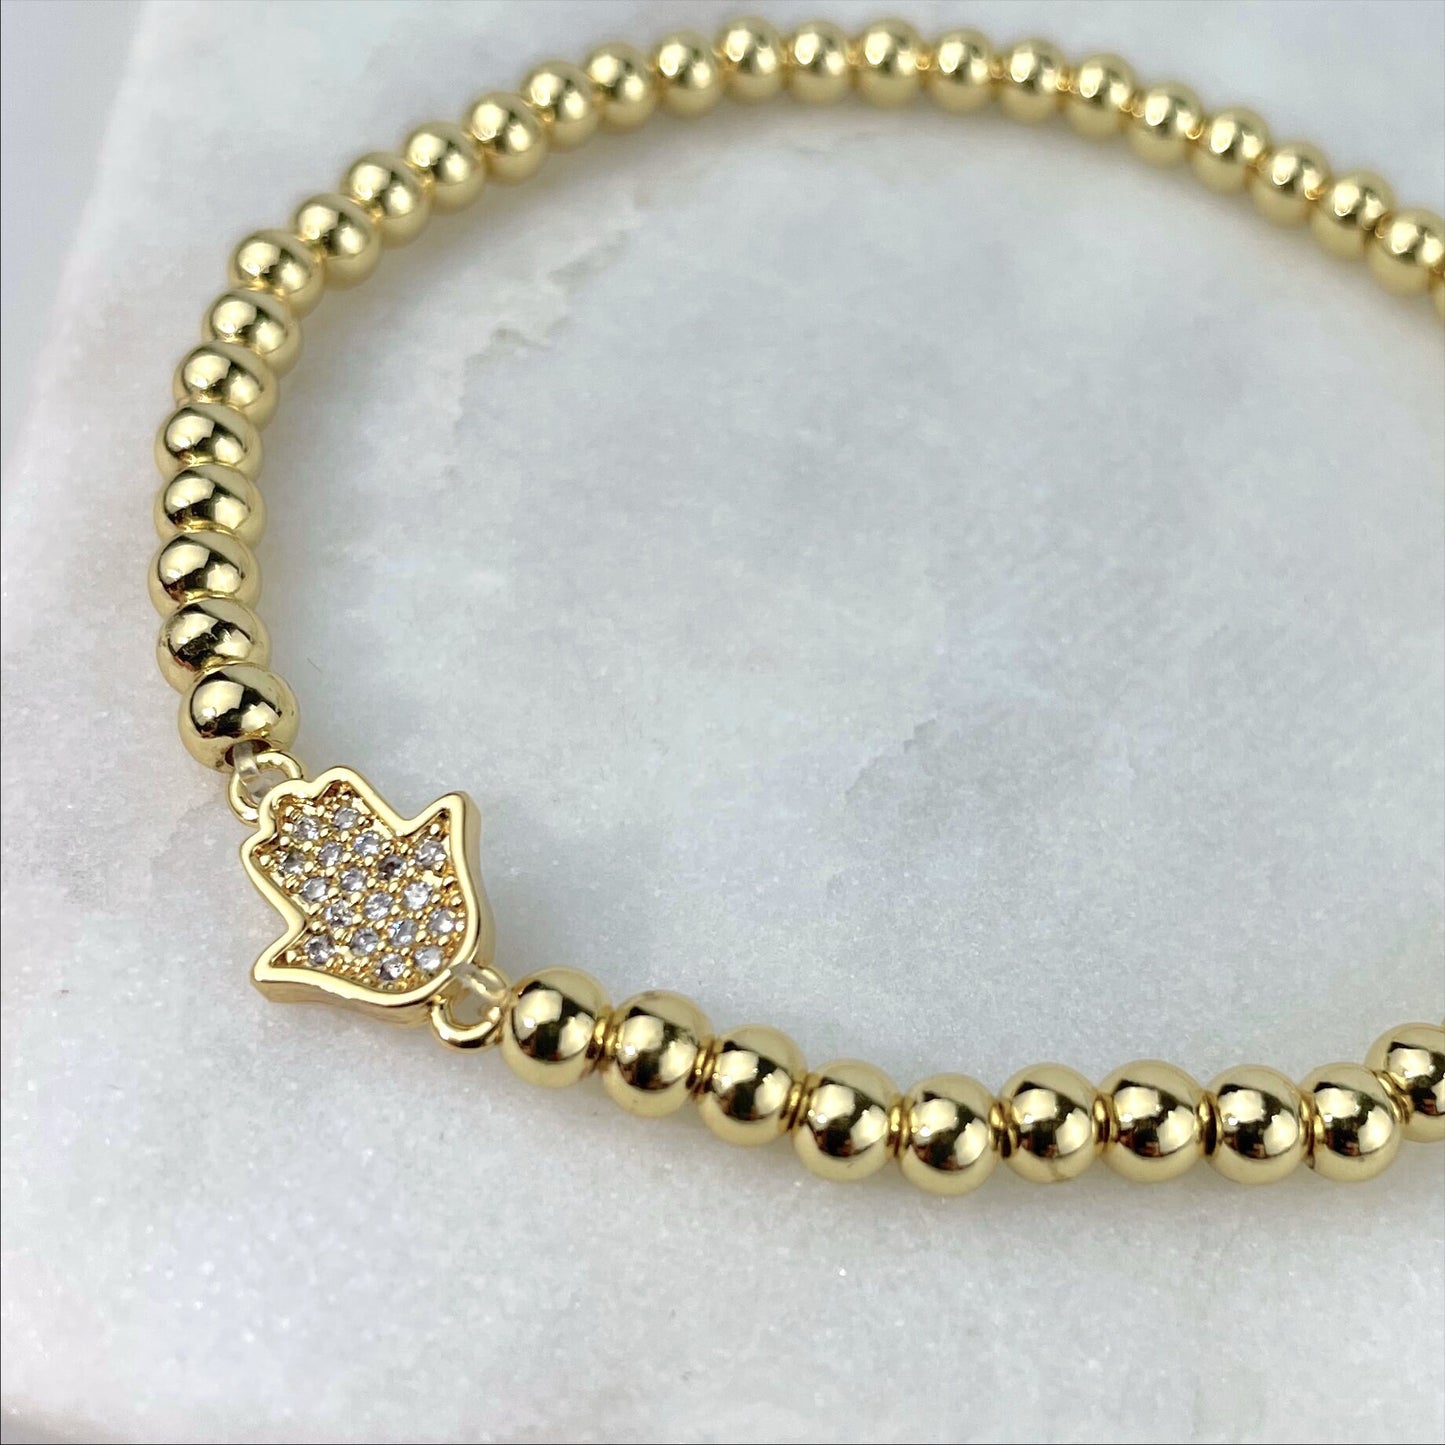 18k Gold Filled 4mm Beaded Bracelet with Clear Micro Cubic Zirconia Hamsa Hand Charm, Wholesale Jewelry Making Supplies